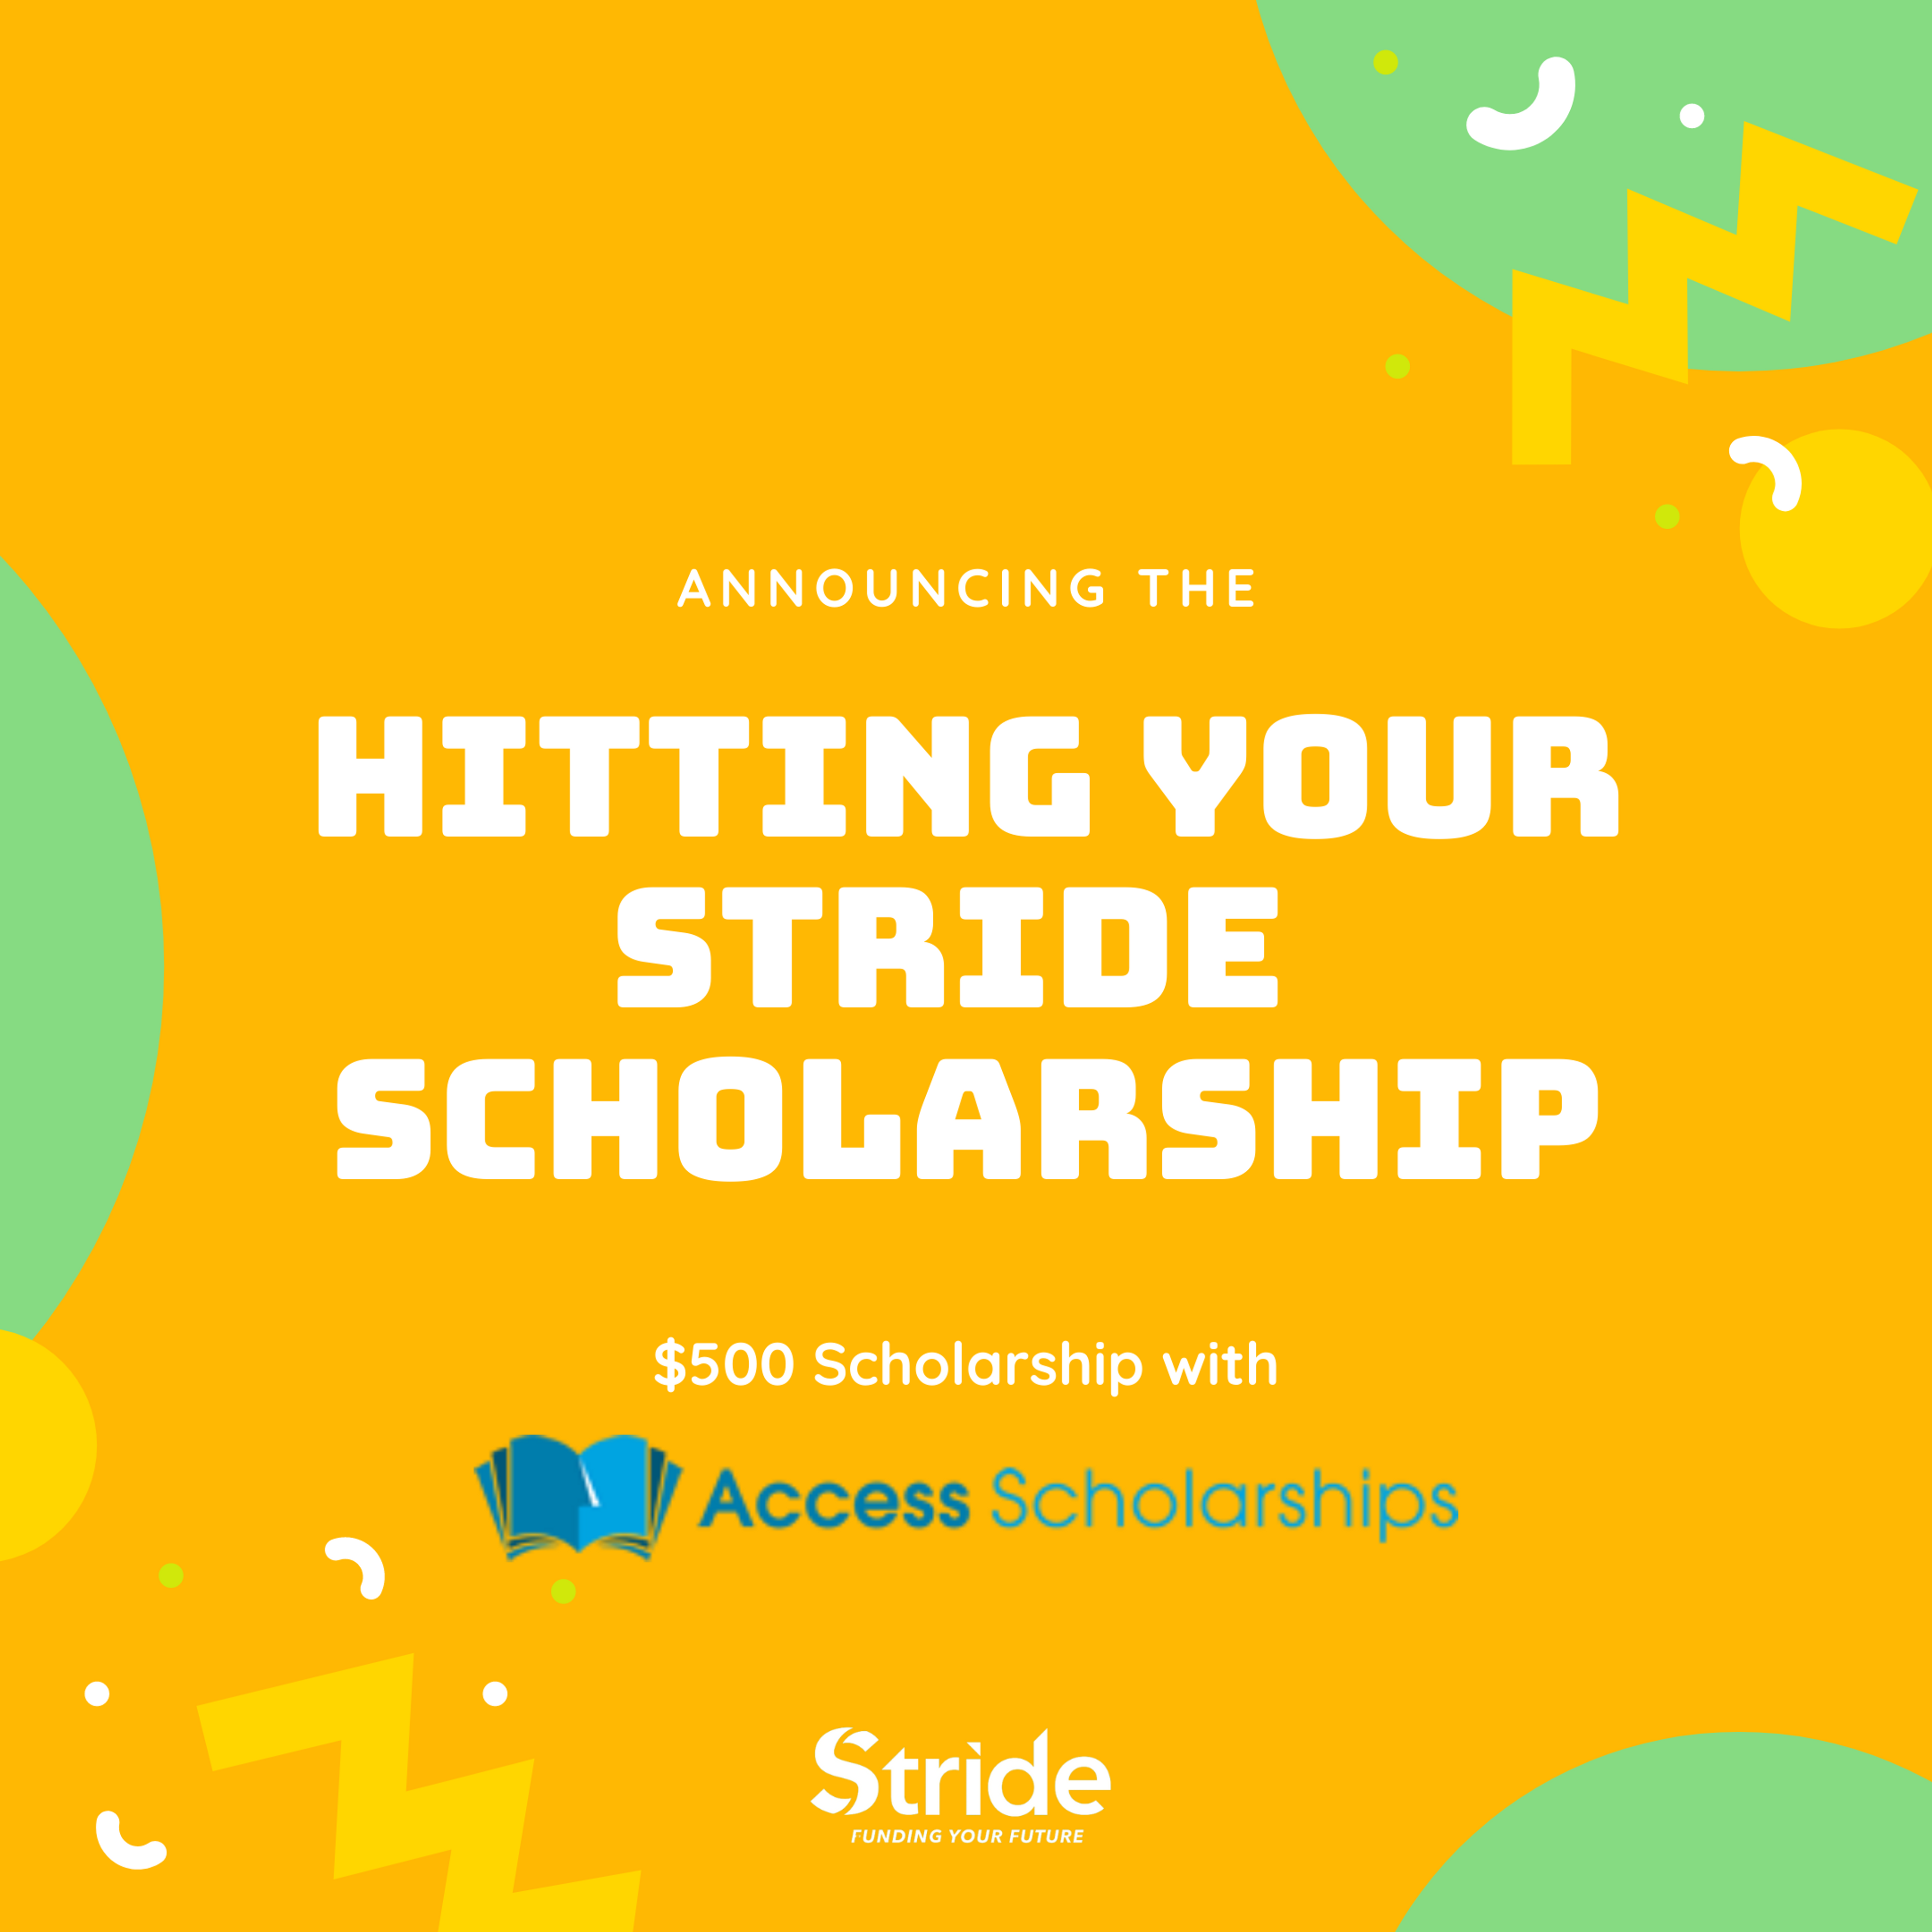 Access Scholarships + Stride: Hitting Your Stride Scholarship